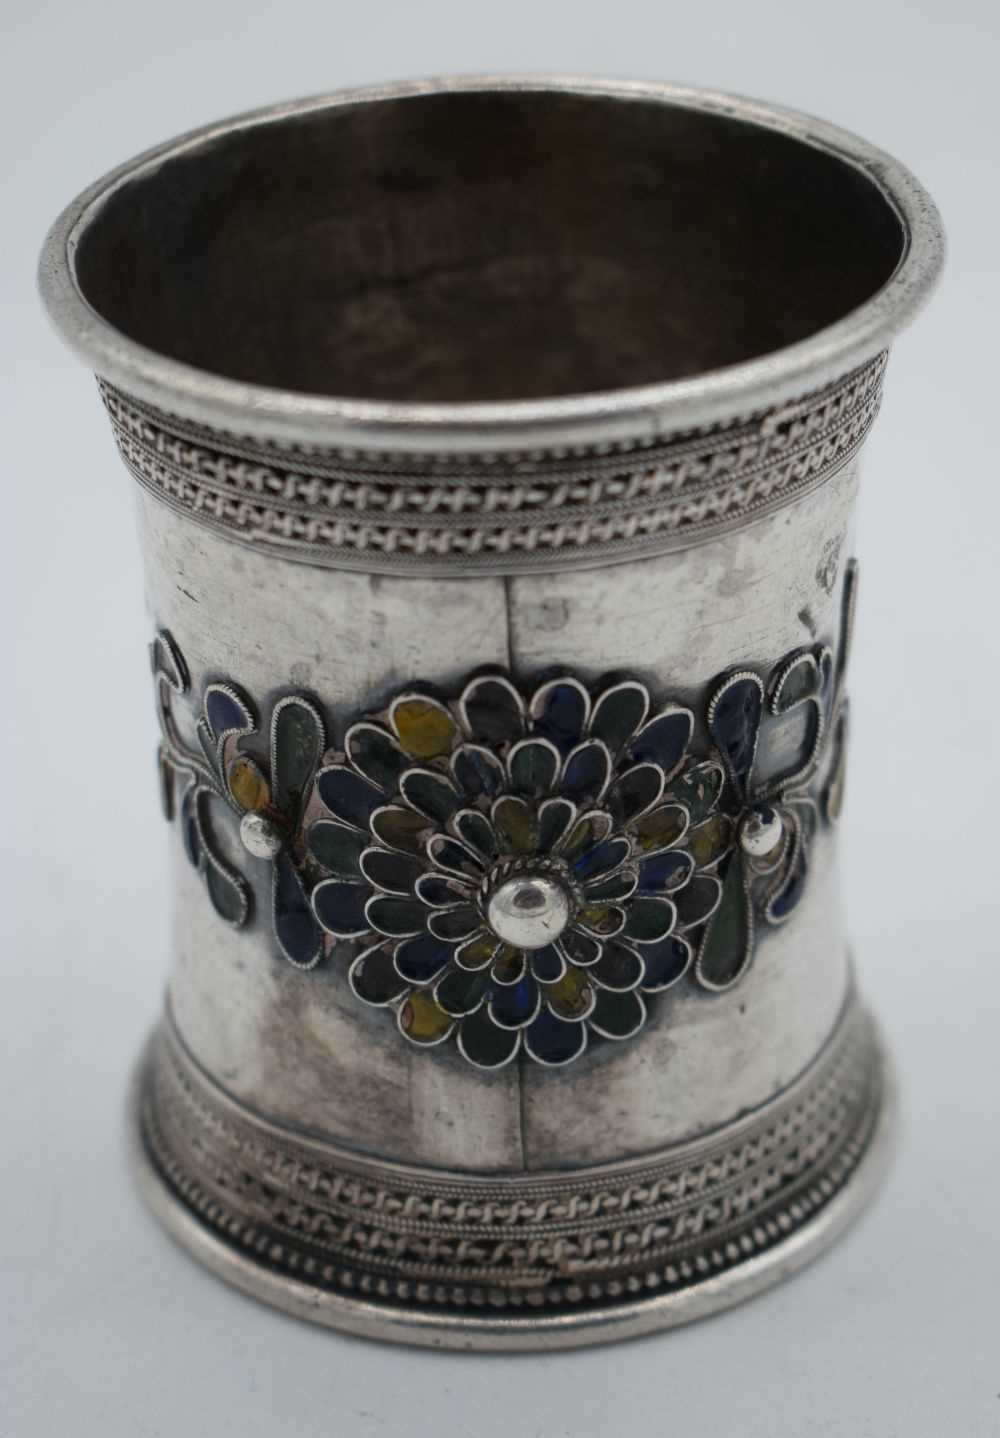 AN UNUSUAL 19TH CENTURY CONTINENTAL SILVER AND ENAMEL ARM BANGLE possibly Russian. 153 grams. 9 cm x